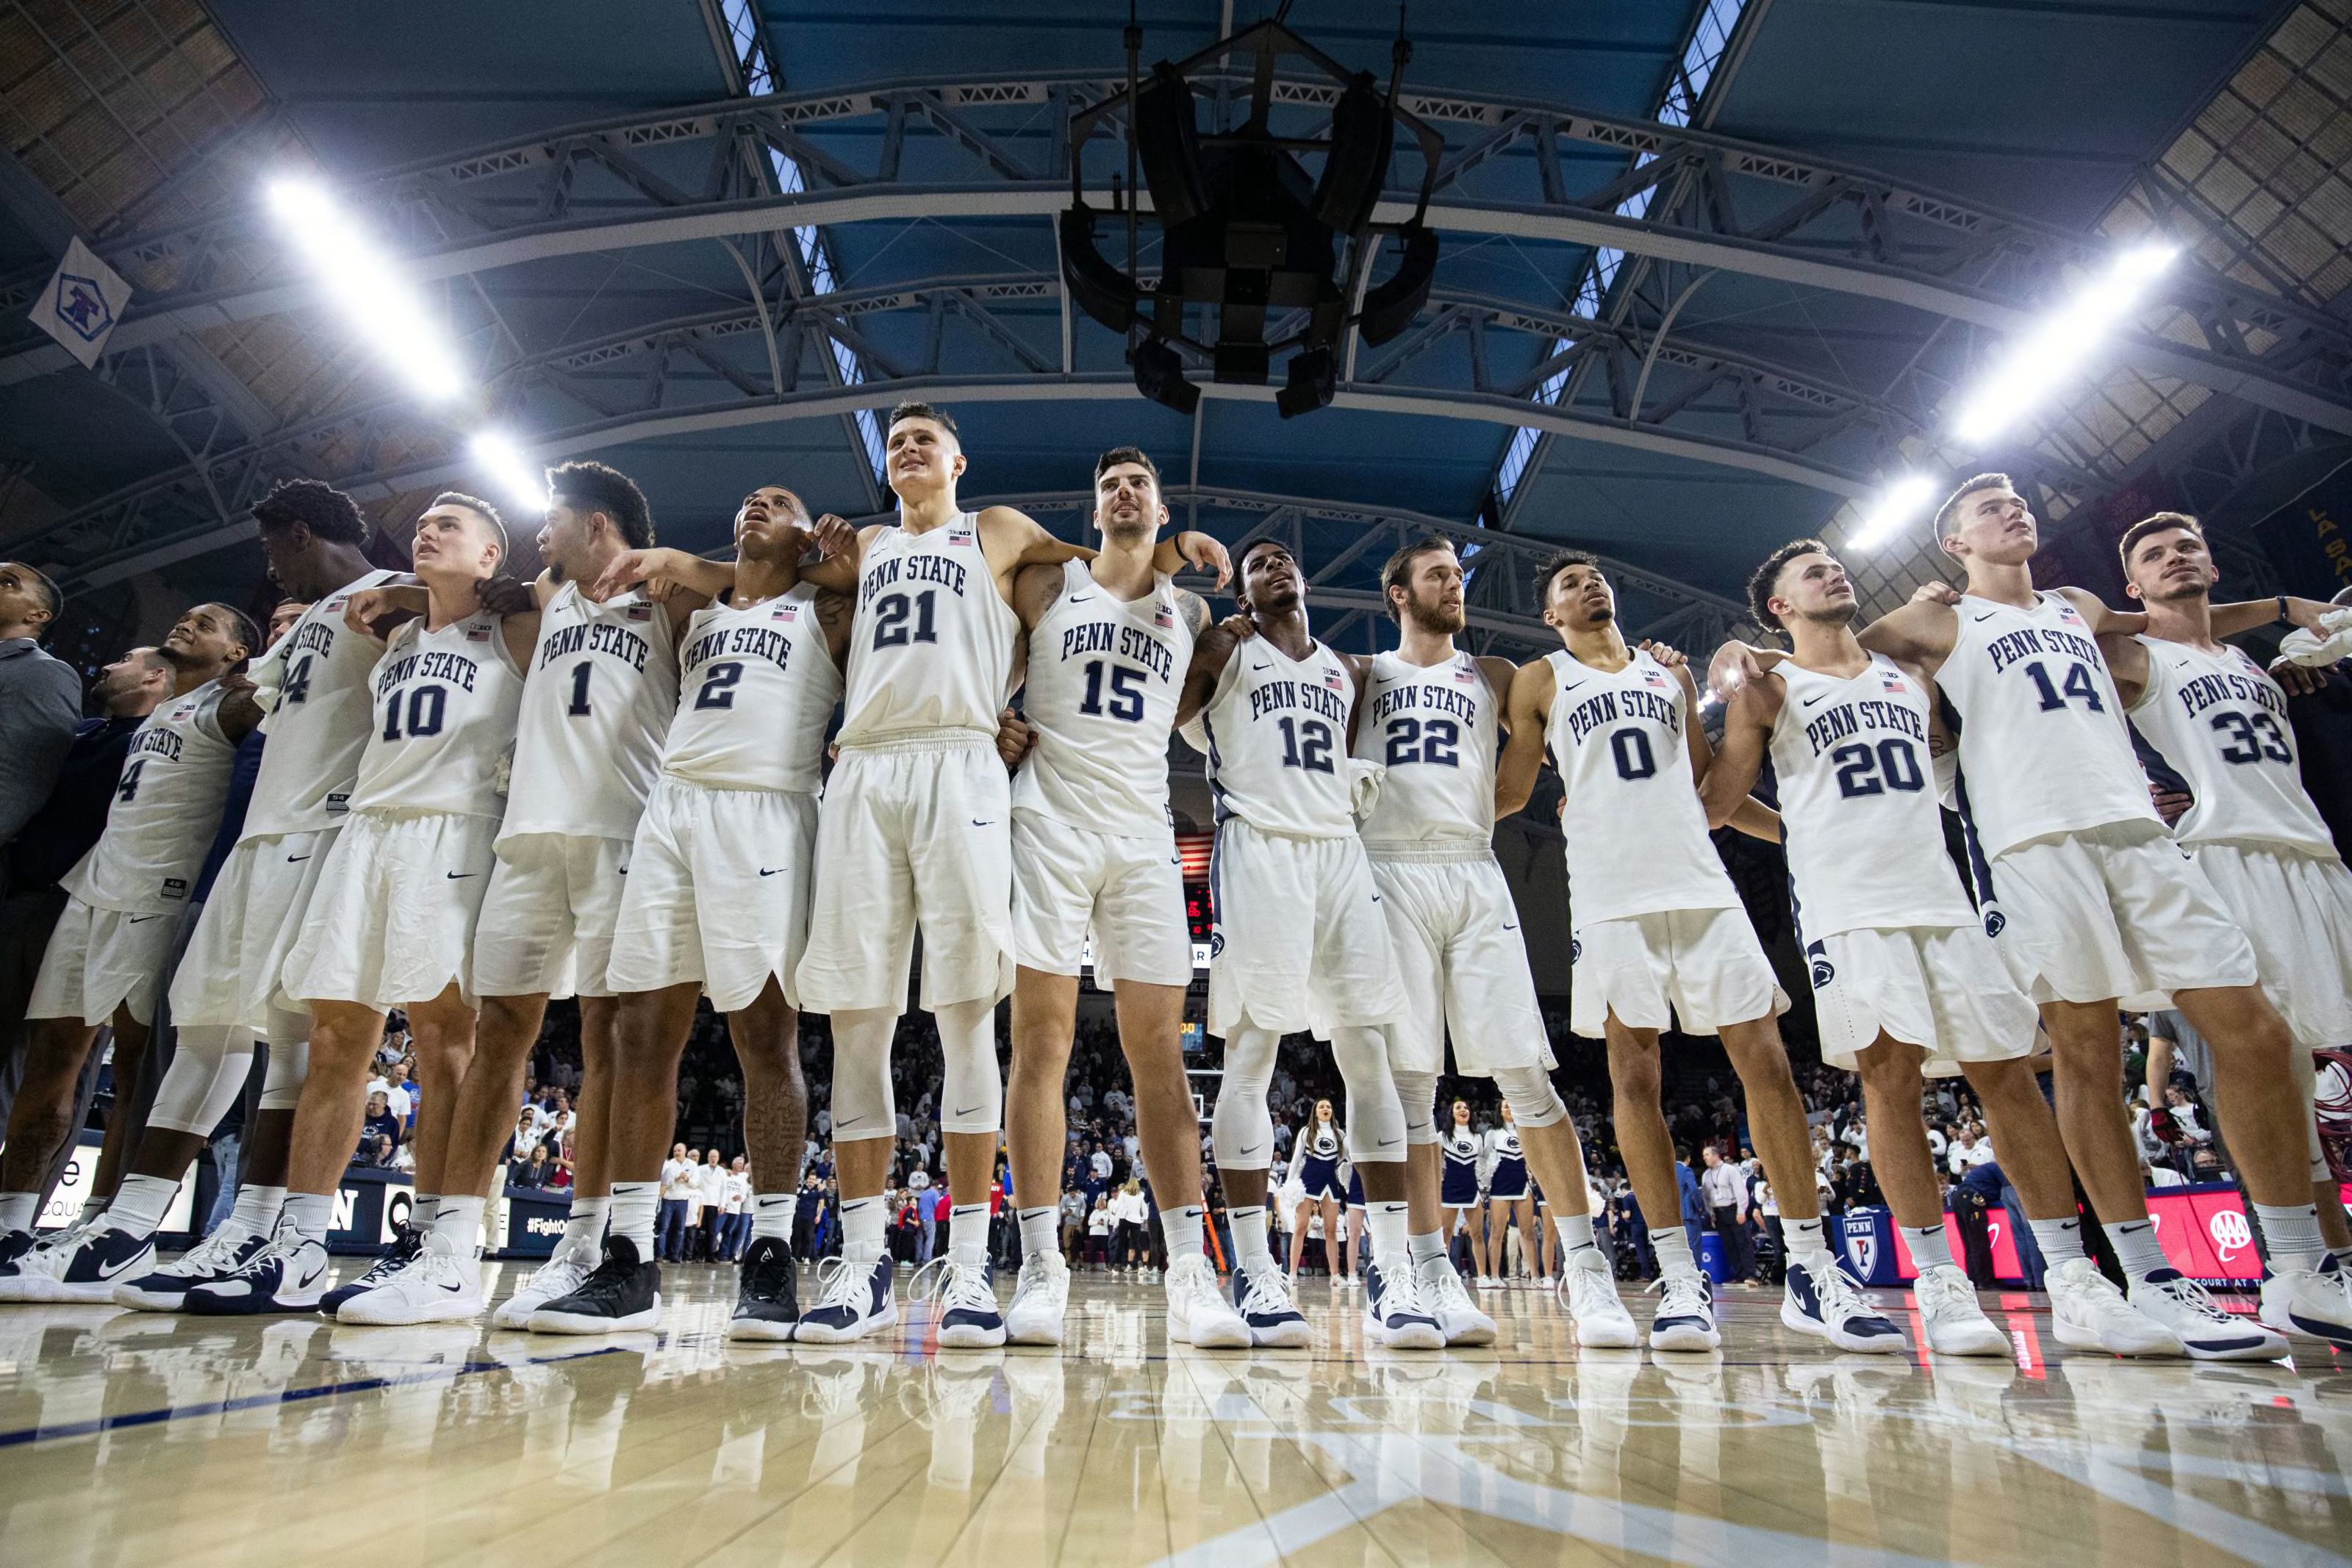 Penn State Basketball 202021 season preview for the Nittany Lions